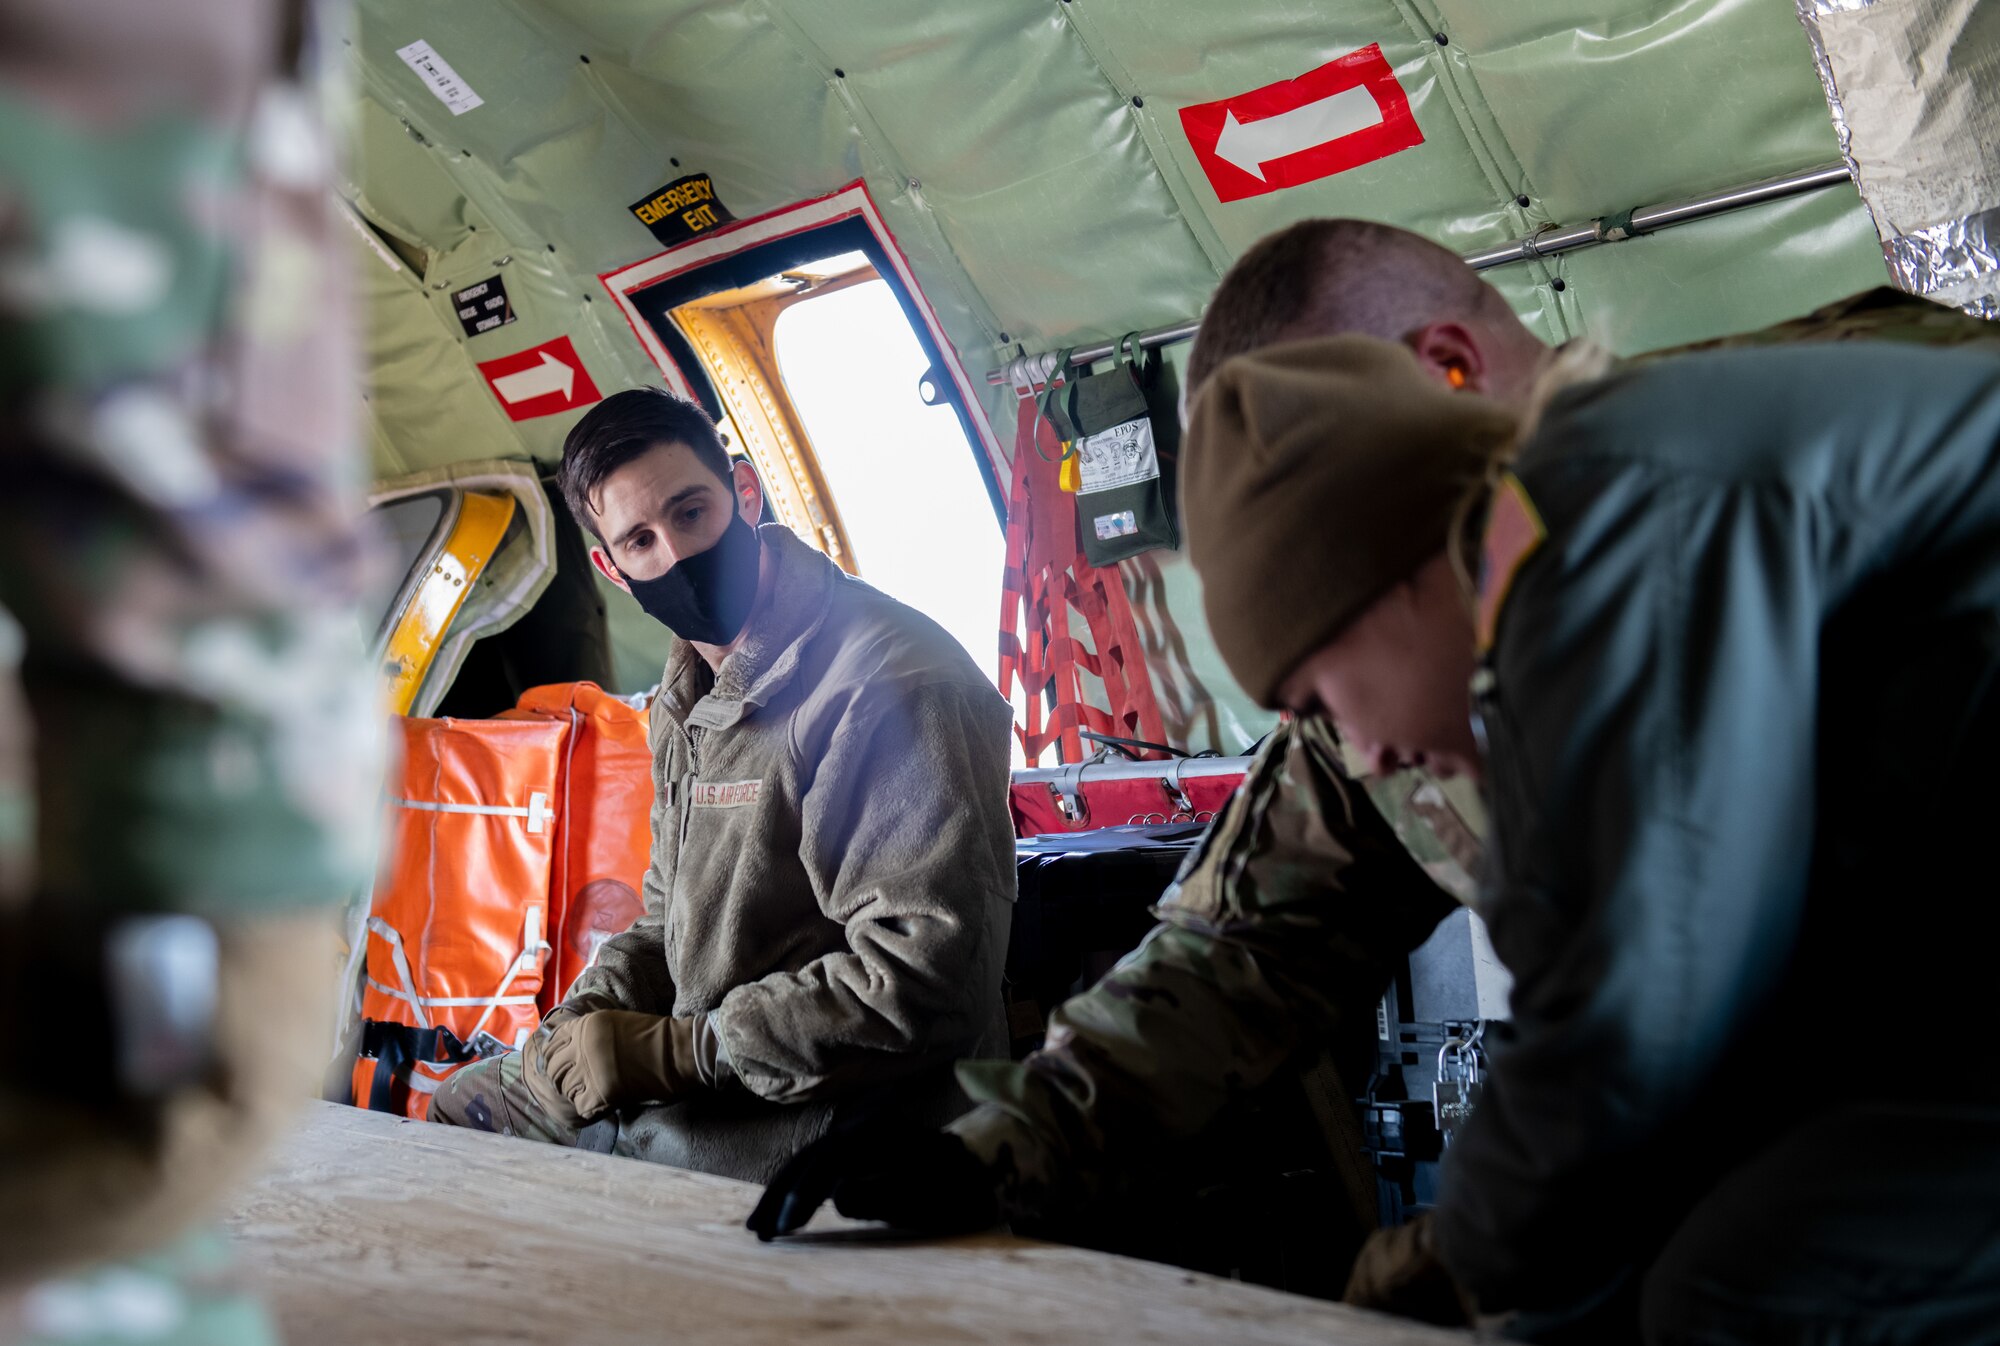 An Airman looks ahead during a lesson during a cargo load exercise on Feb. 5, 2022 at Hill Air Force Base, Utah